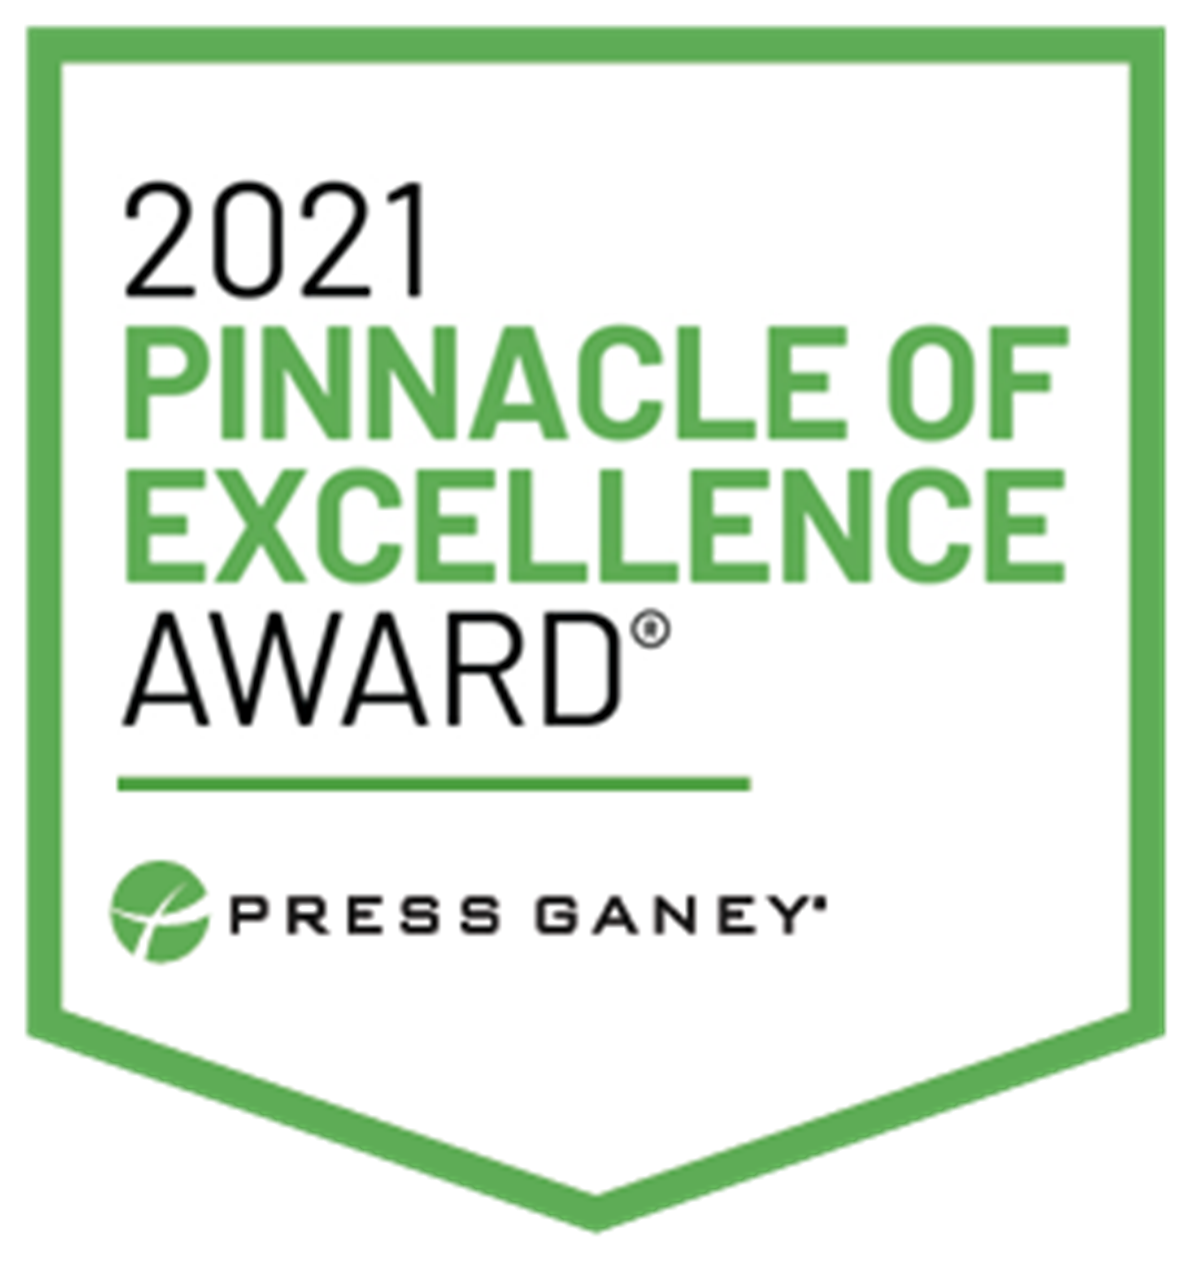 SCH receives two Press Ganey awards for excellence